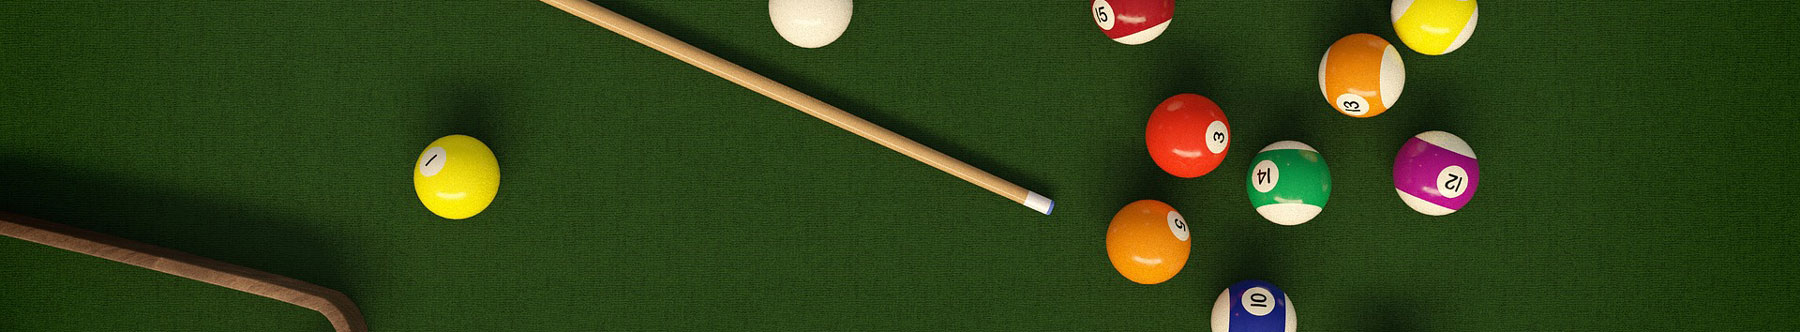 Billiards table with cue stick, ball rack, and a set of balls.